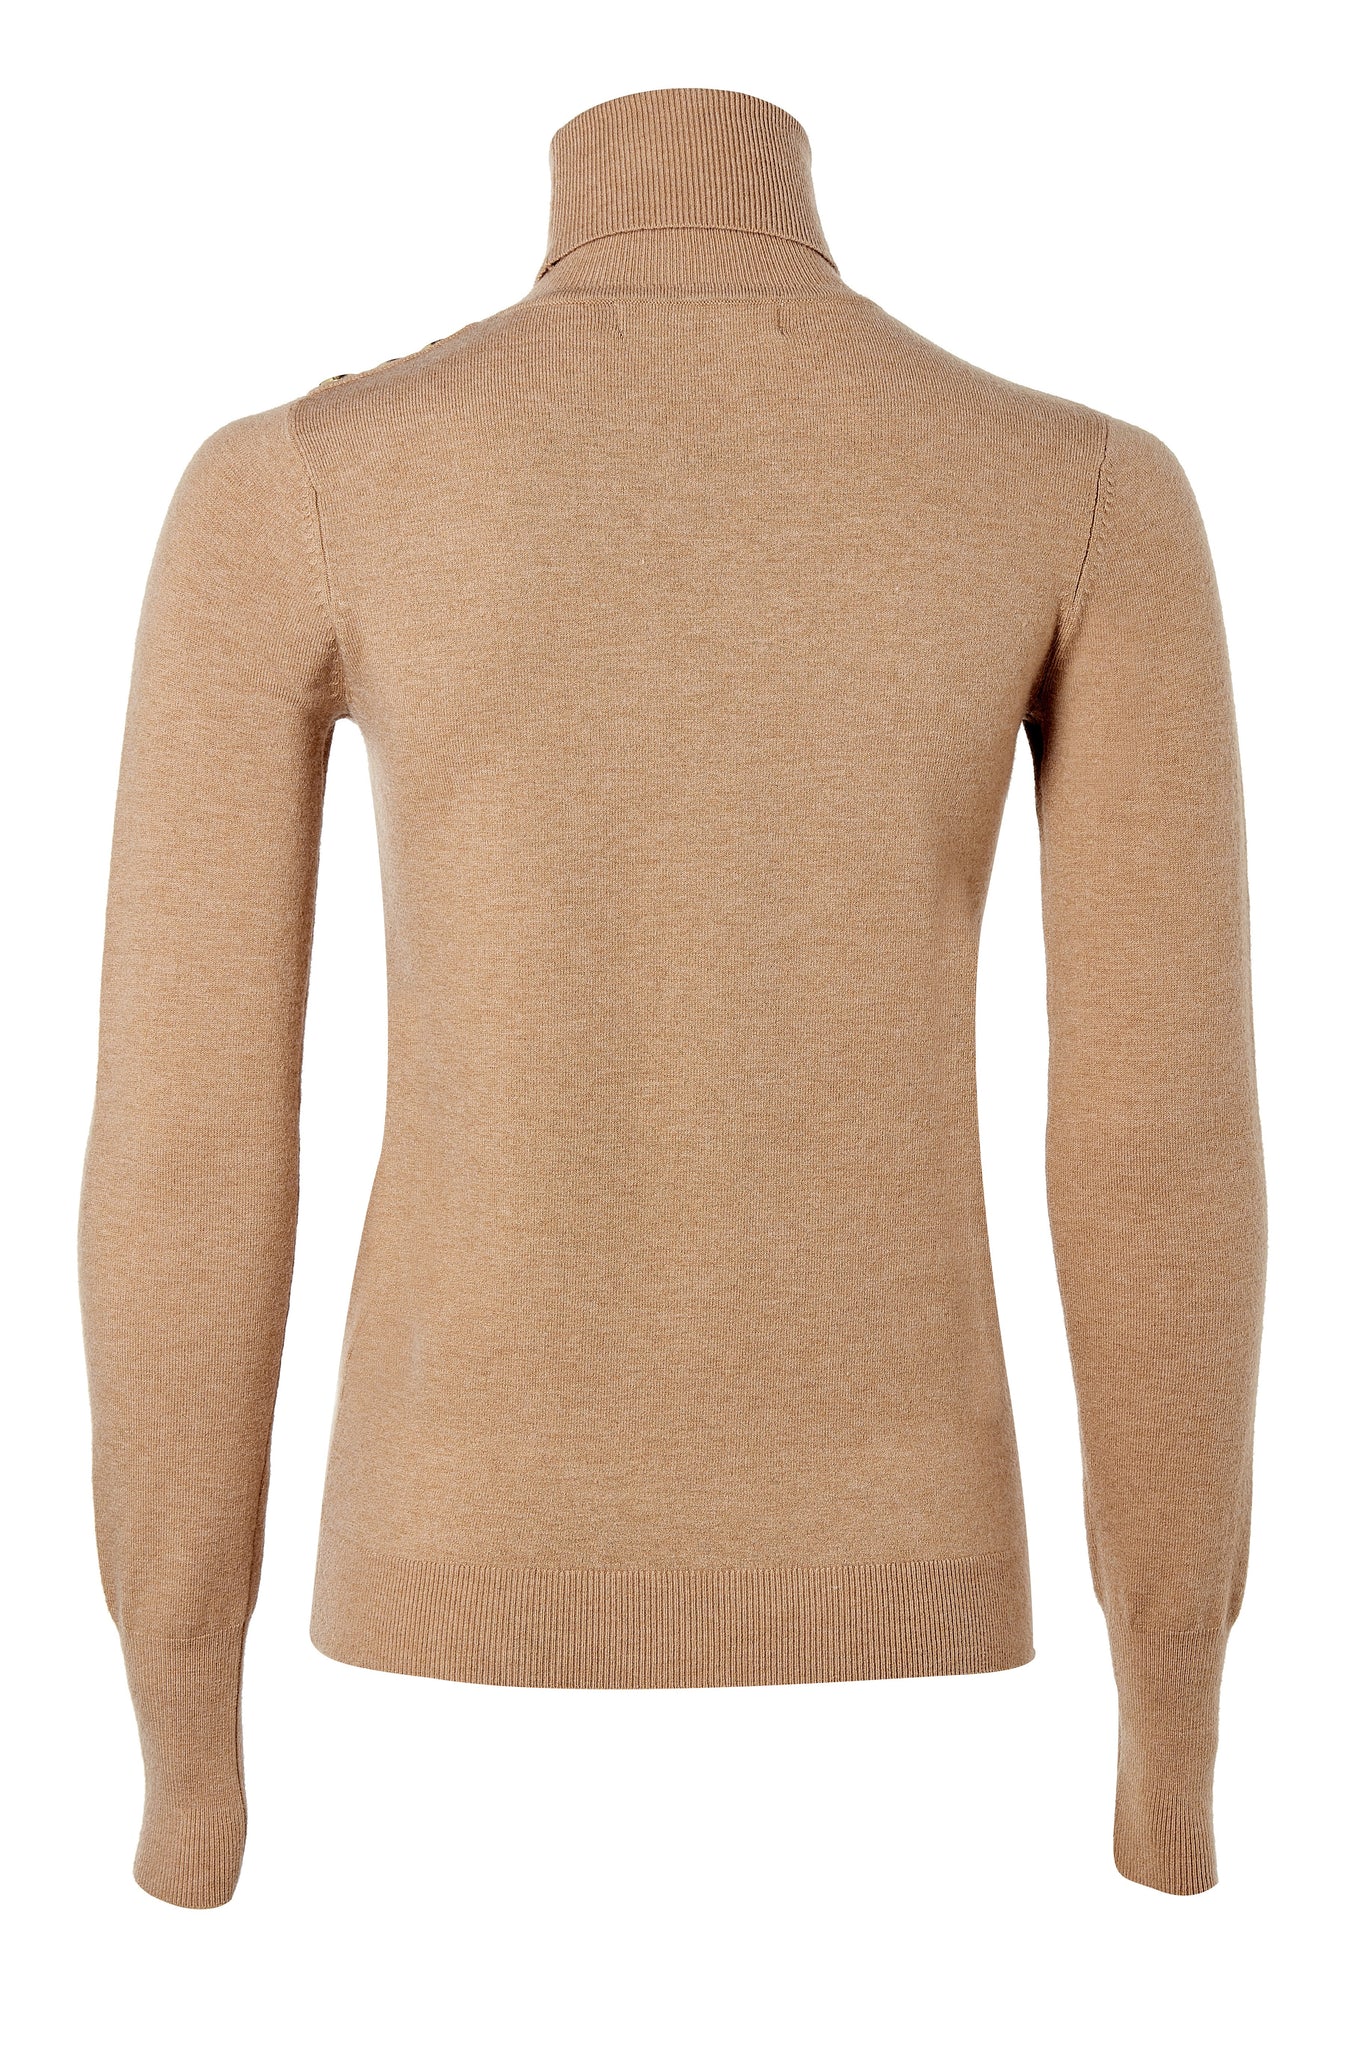 back of super soft lightweight jumper in dark camel with ribbed roll neck collar, cuffs and hem